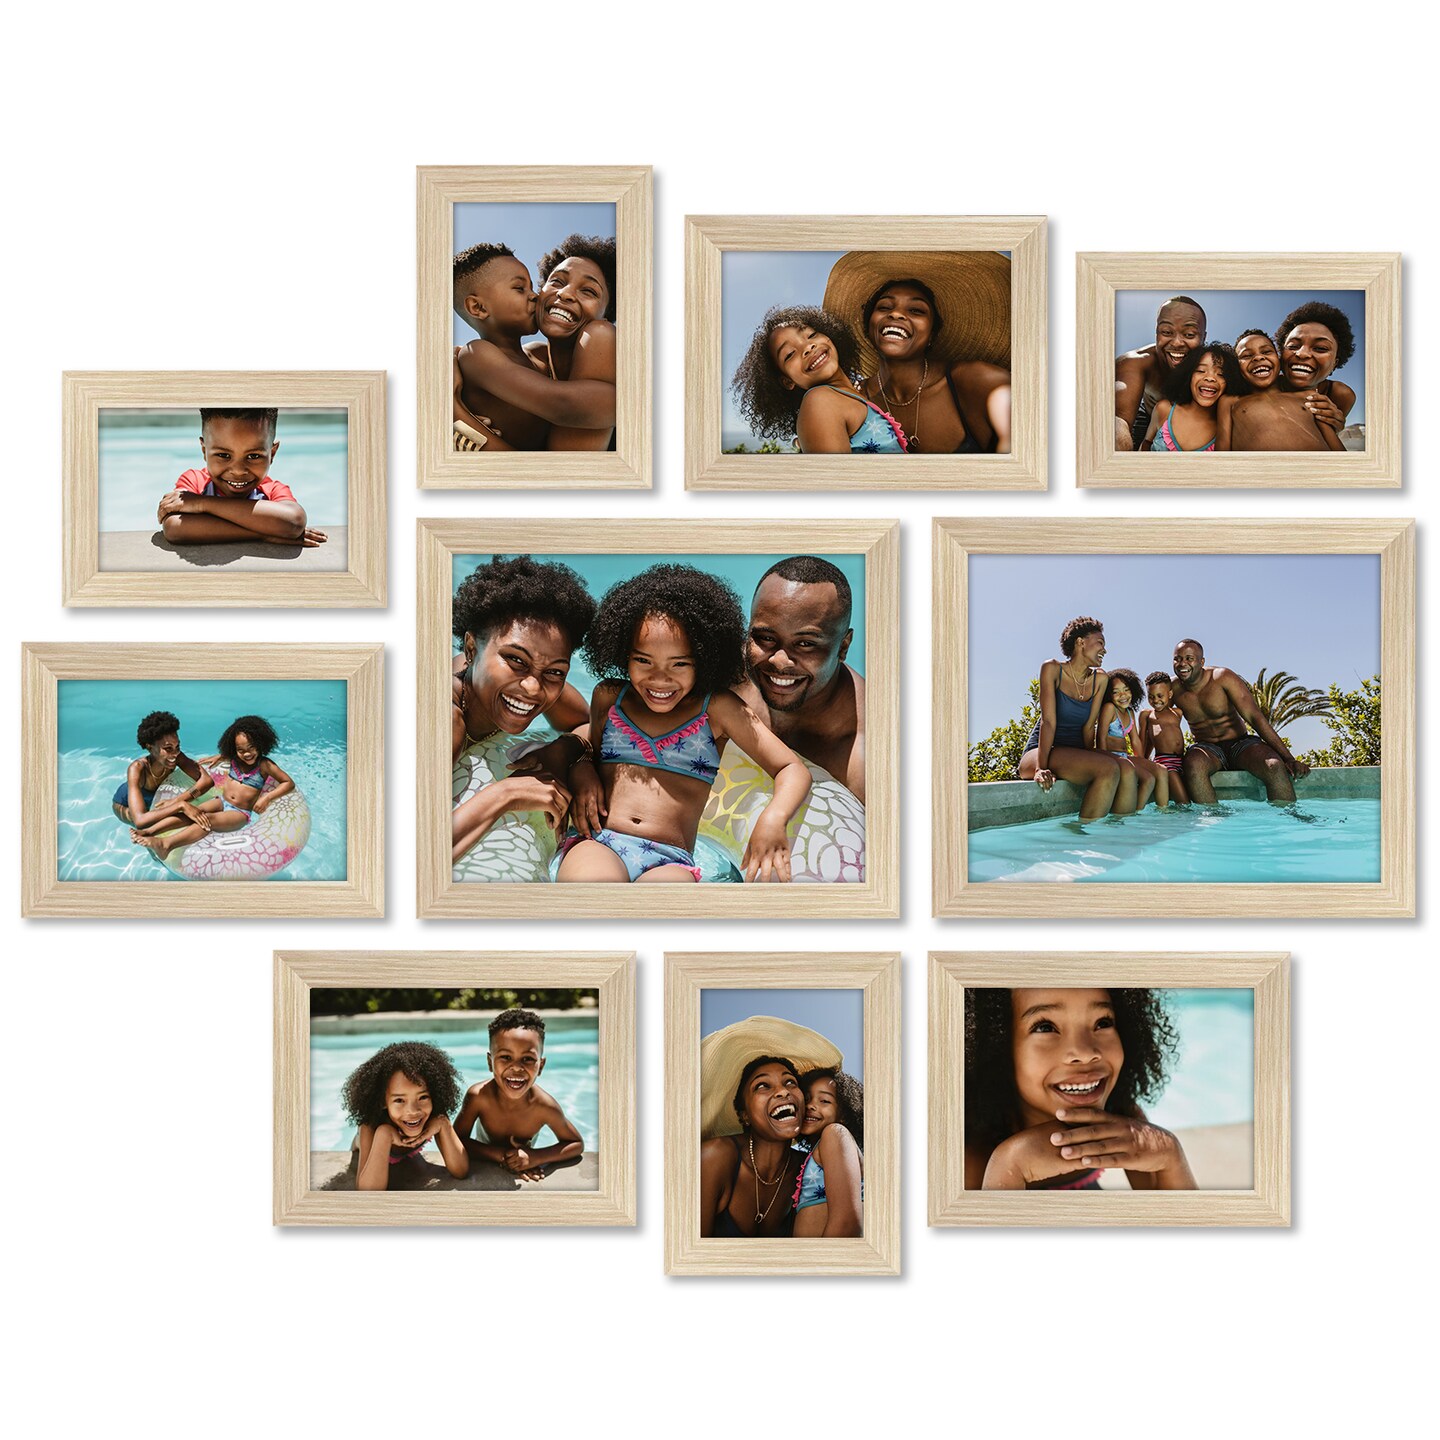 Americanflat Set Of 10 Picture Frames - Gallery Wall 8x10, 5x7